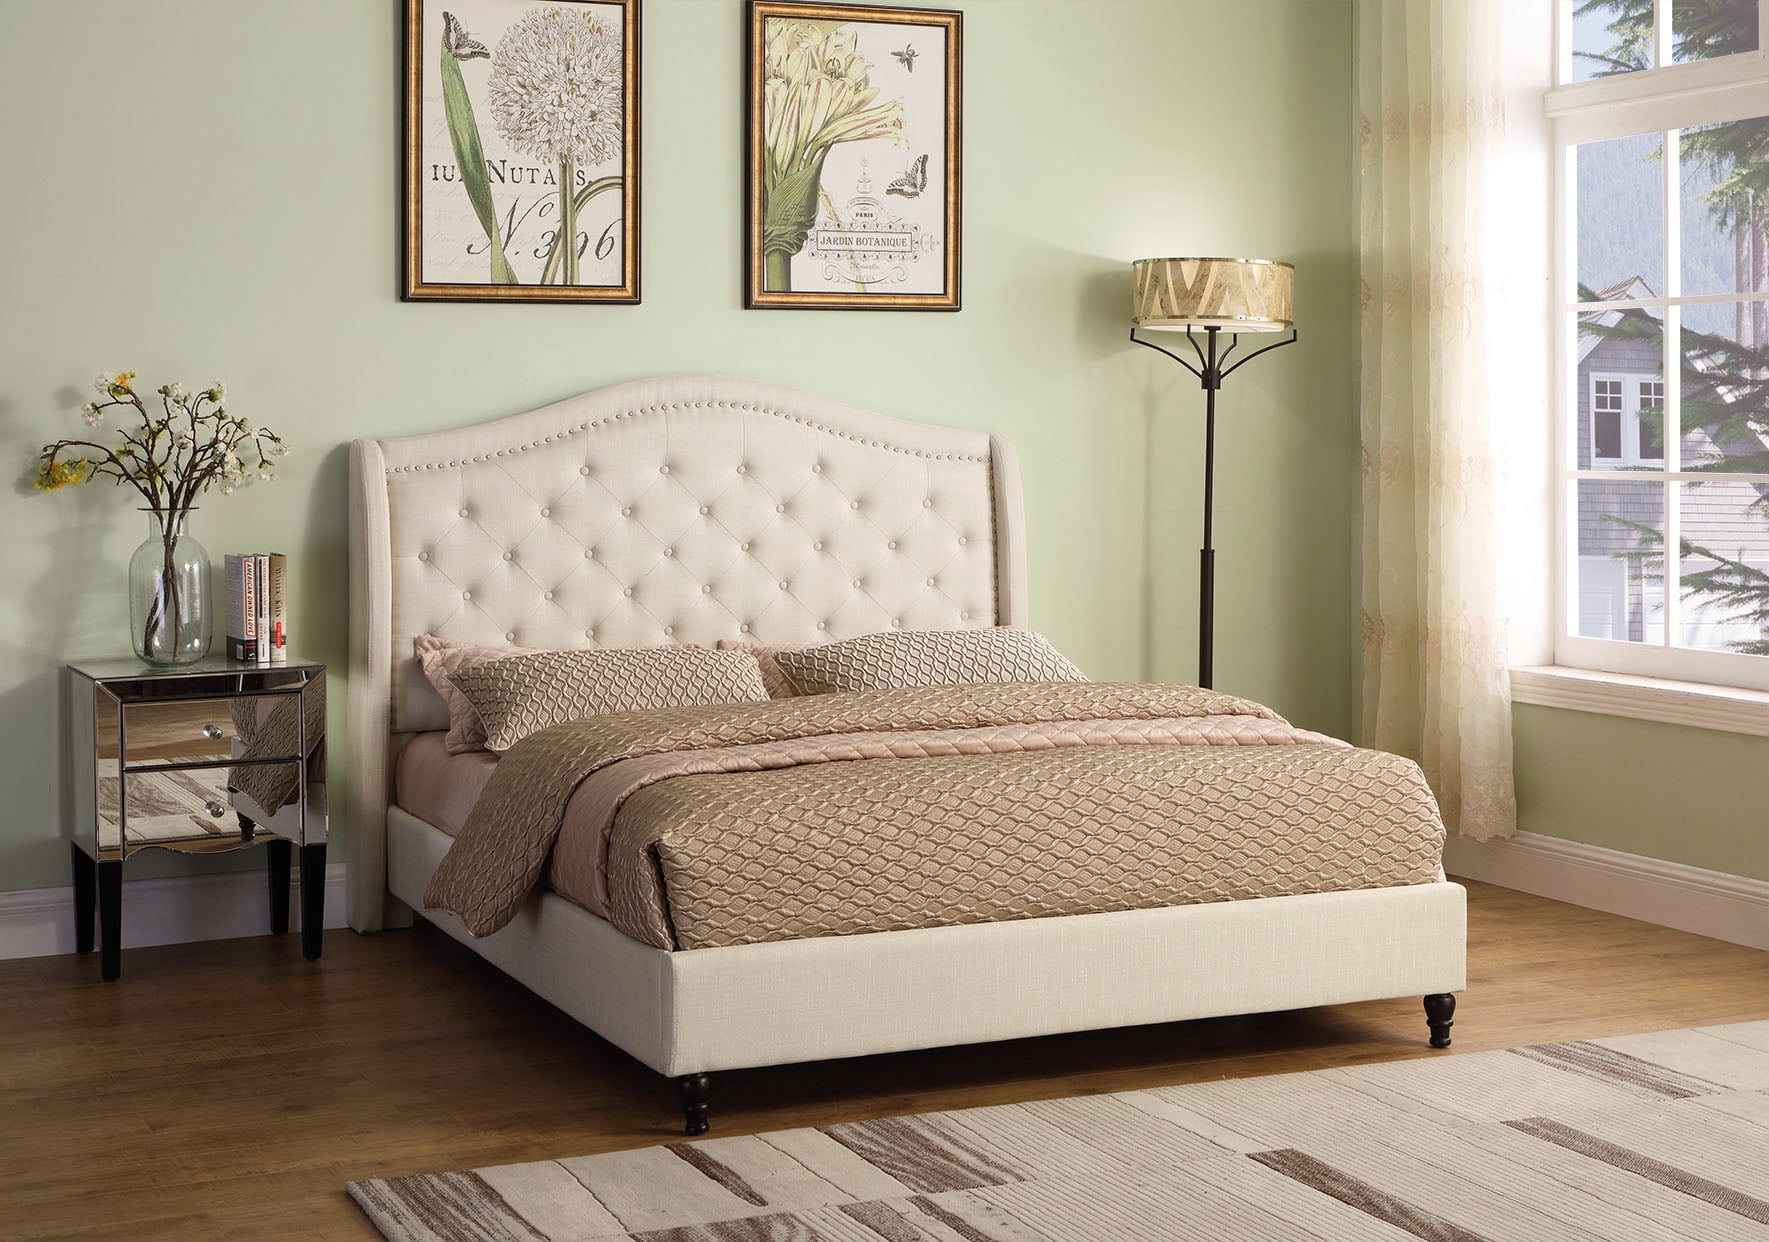 Bedroom Furniture Tufted Beige Fabric Upholstered Square King Headboard 